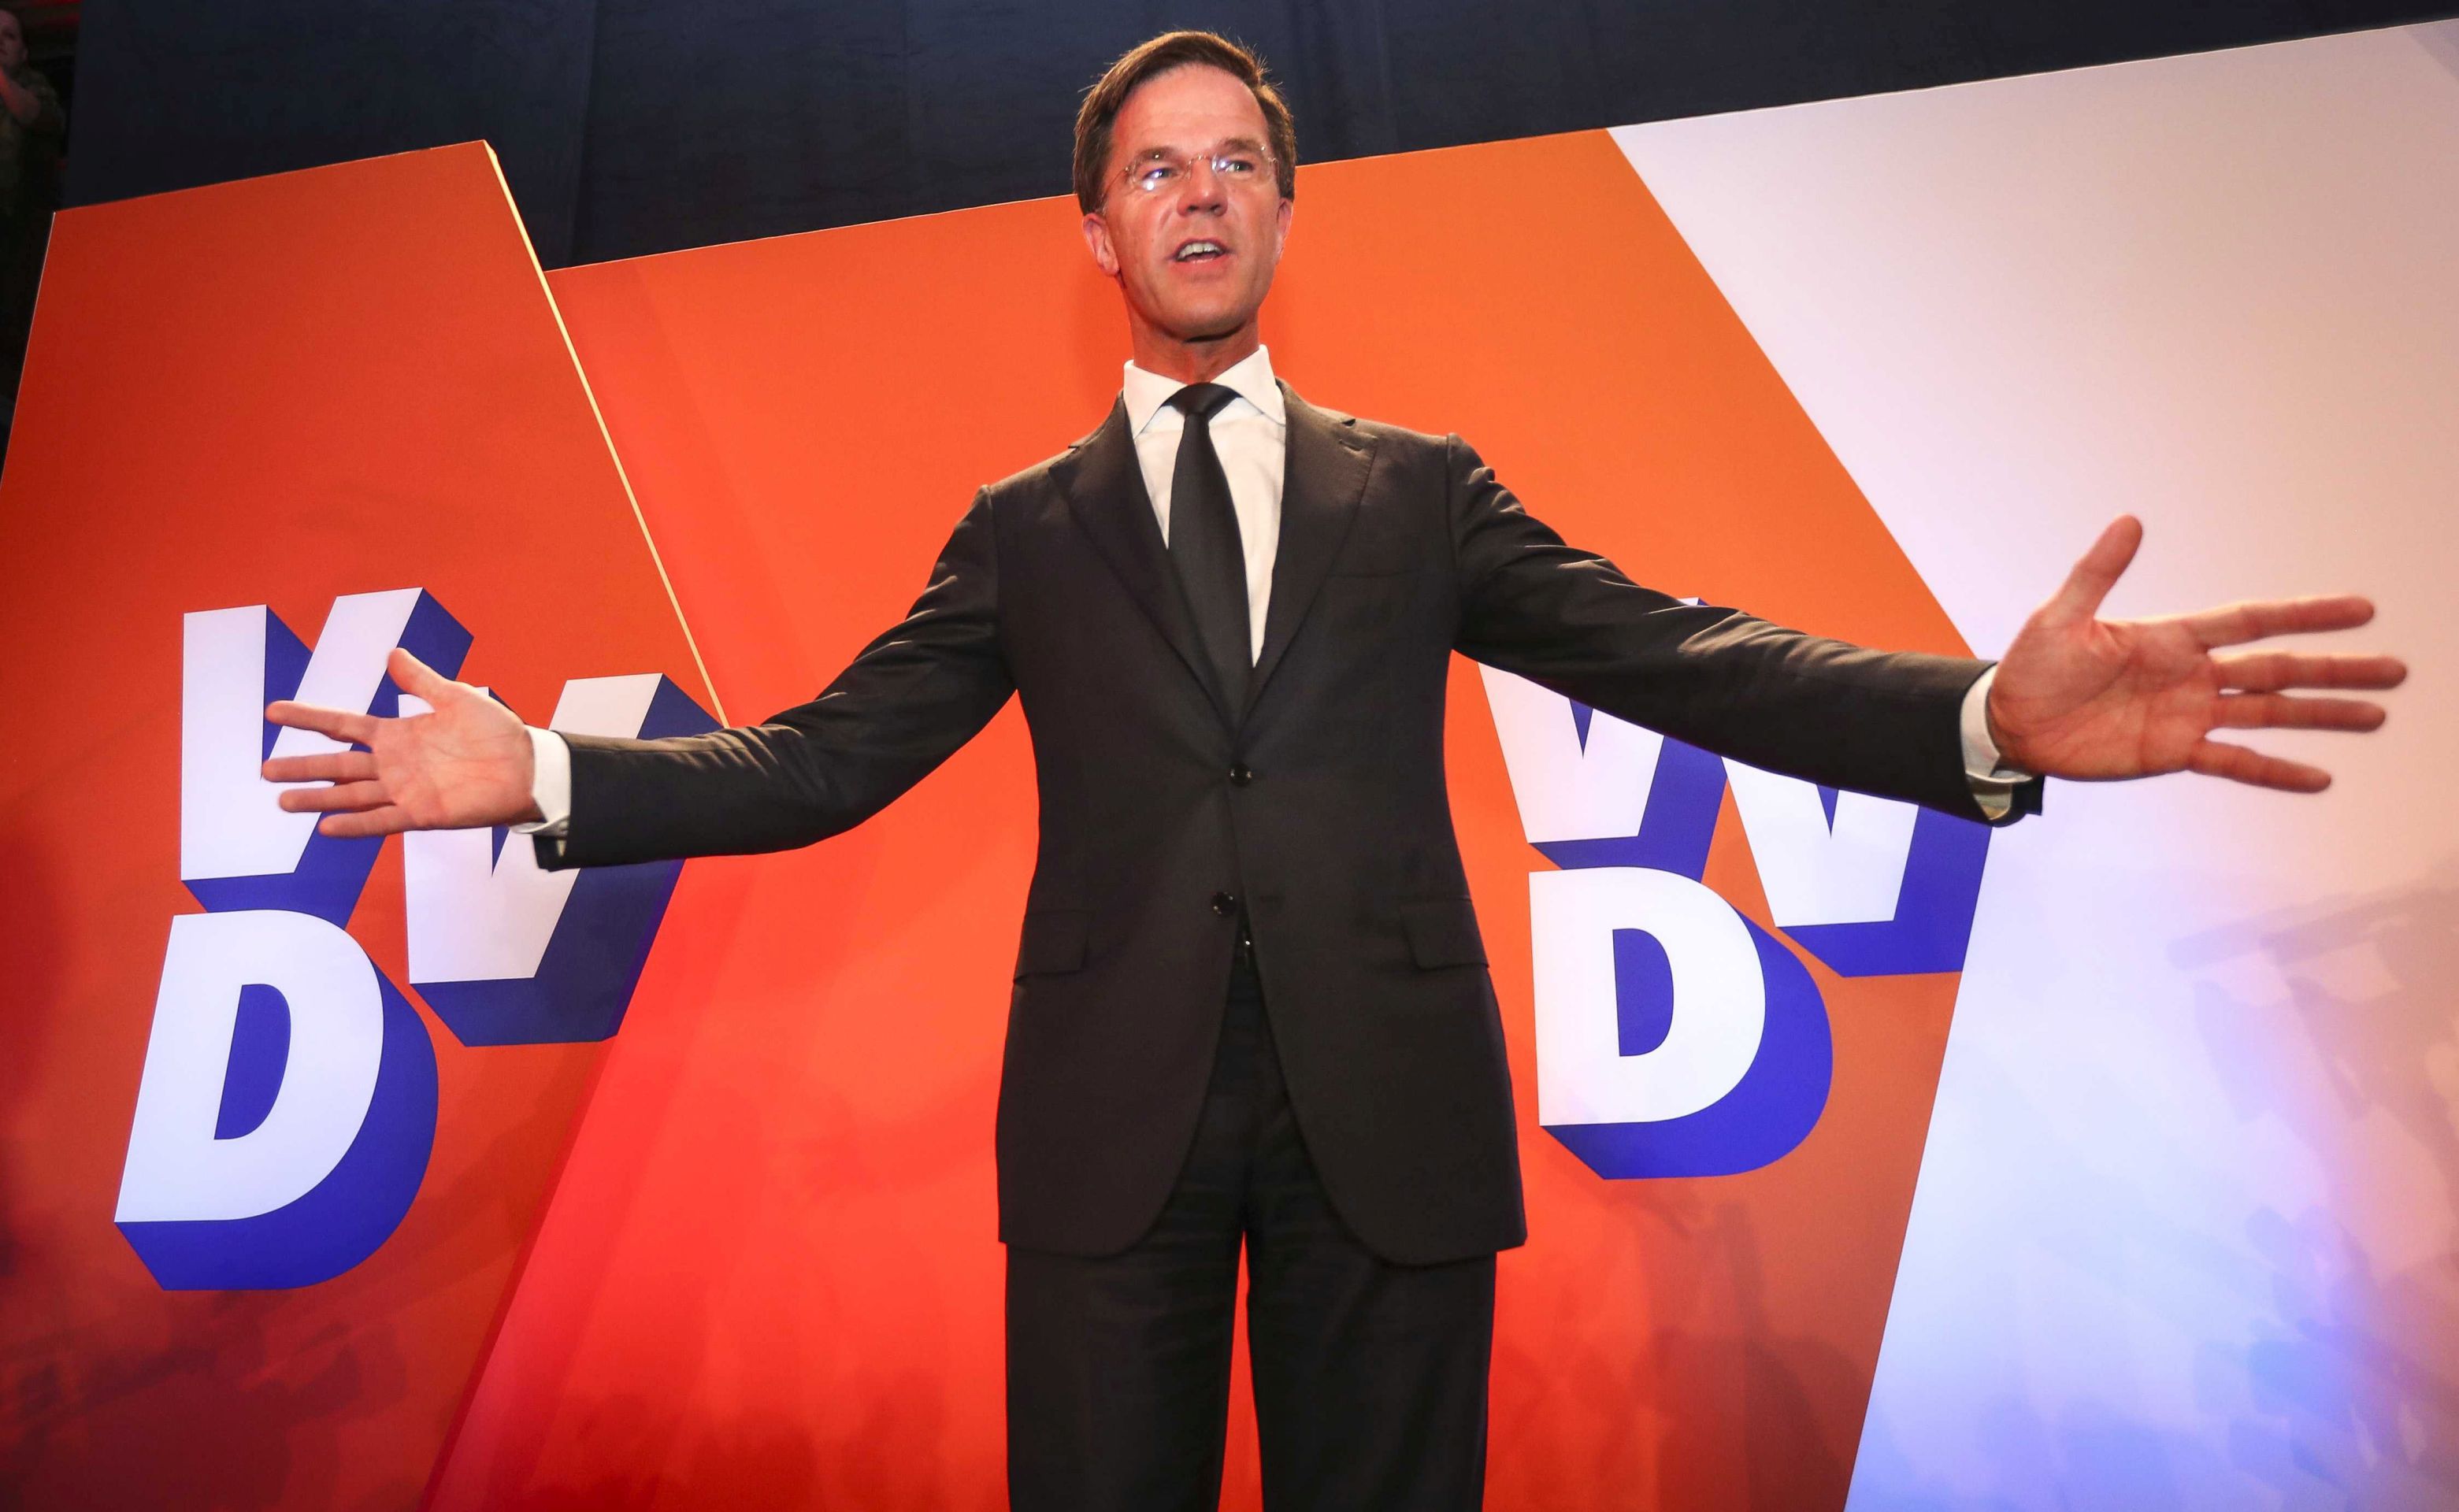 epaselect epa05850969 Dutch Prime Minister Mark Rutte during election night in The Hague, The Netherlands, 15 March 2017. Rutte's center-right VVD party has won the most seats in the parliamentary elections according to the initial exit polls.  EPA/JERRY LAMPEN